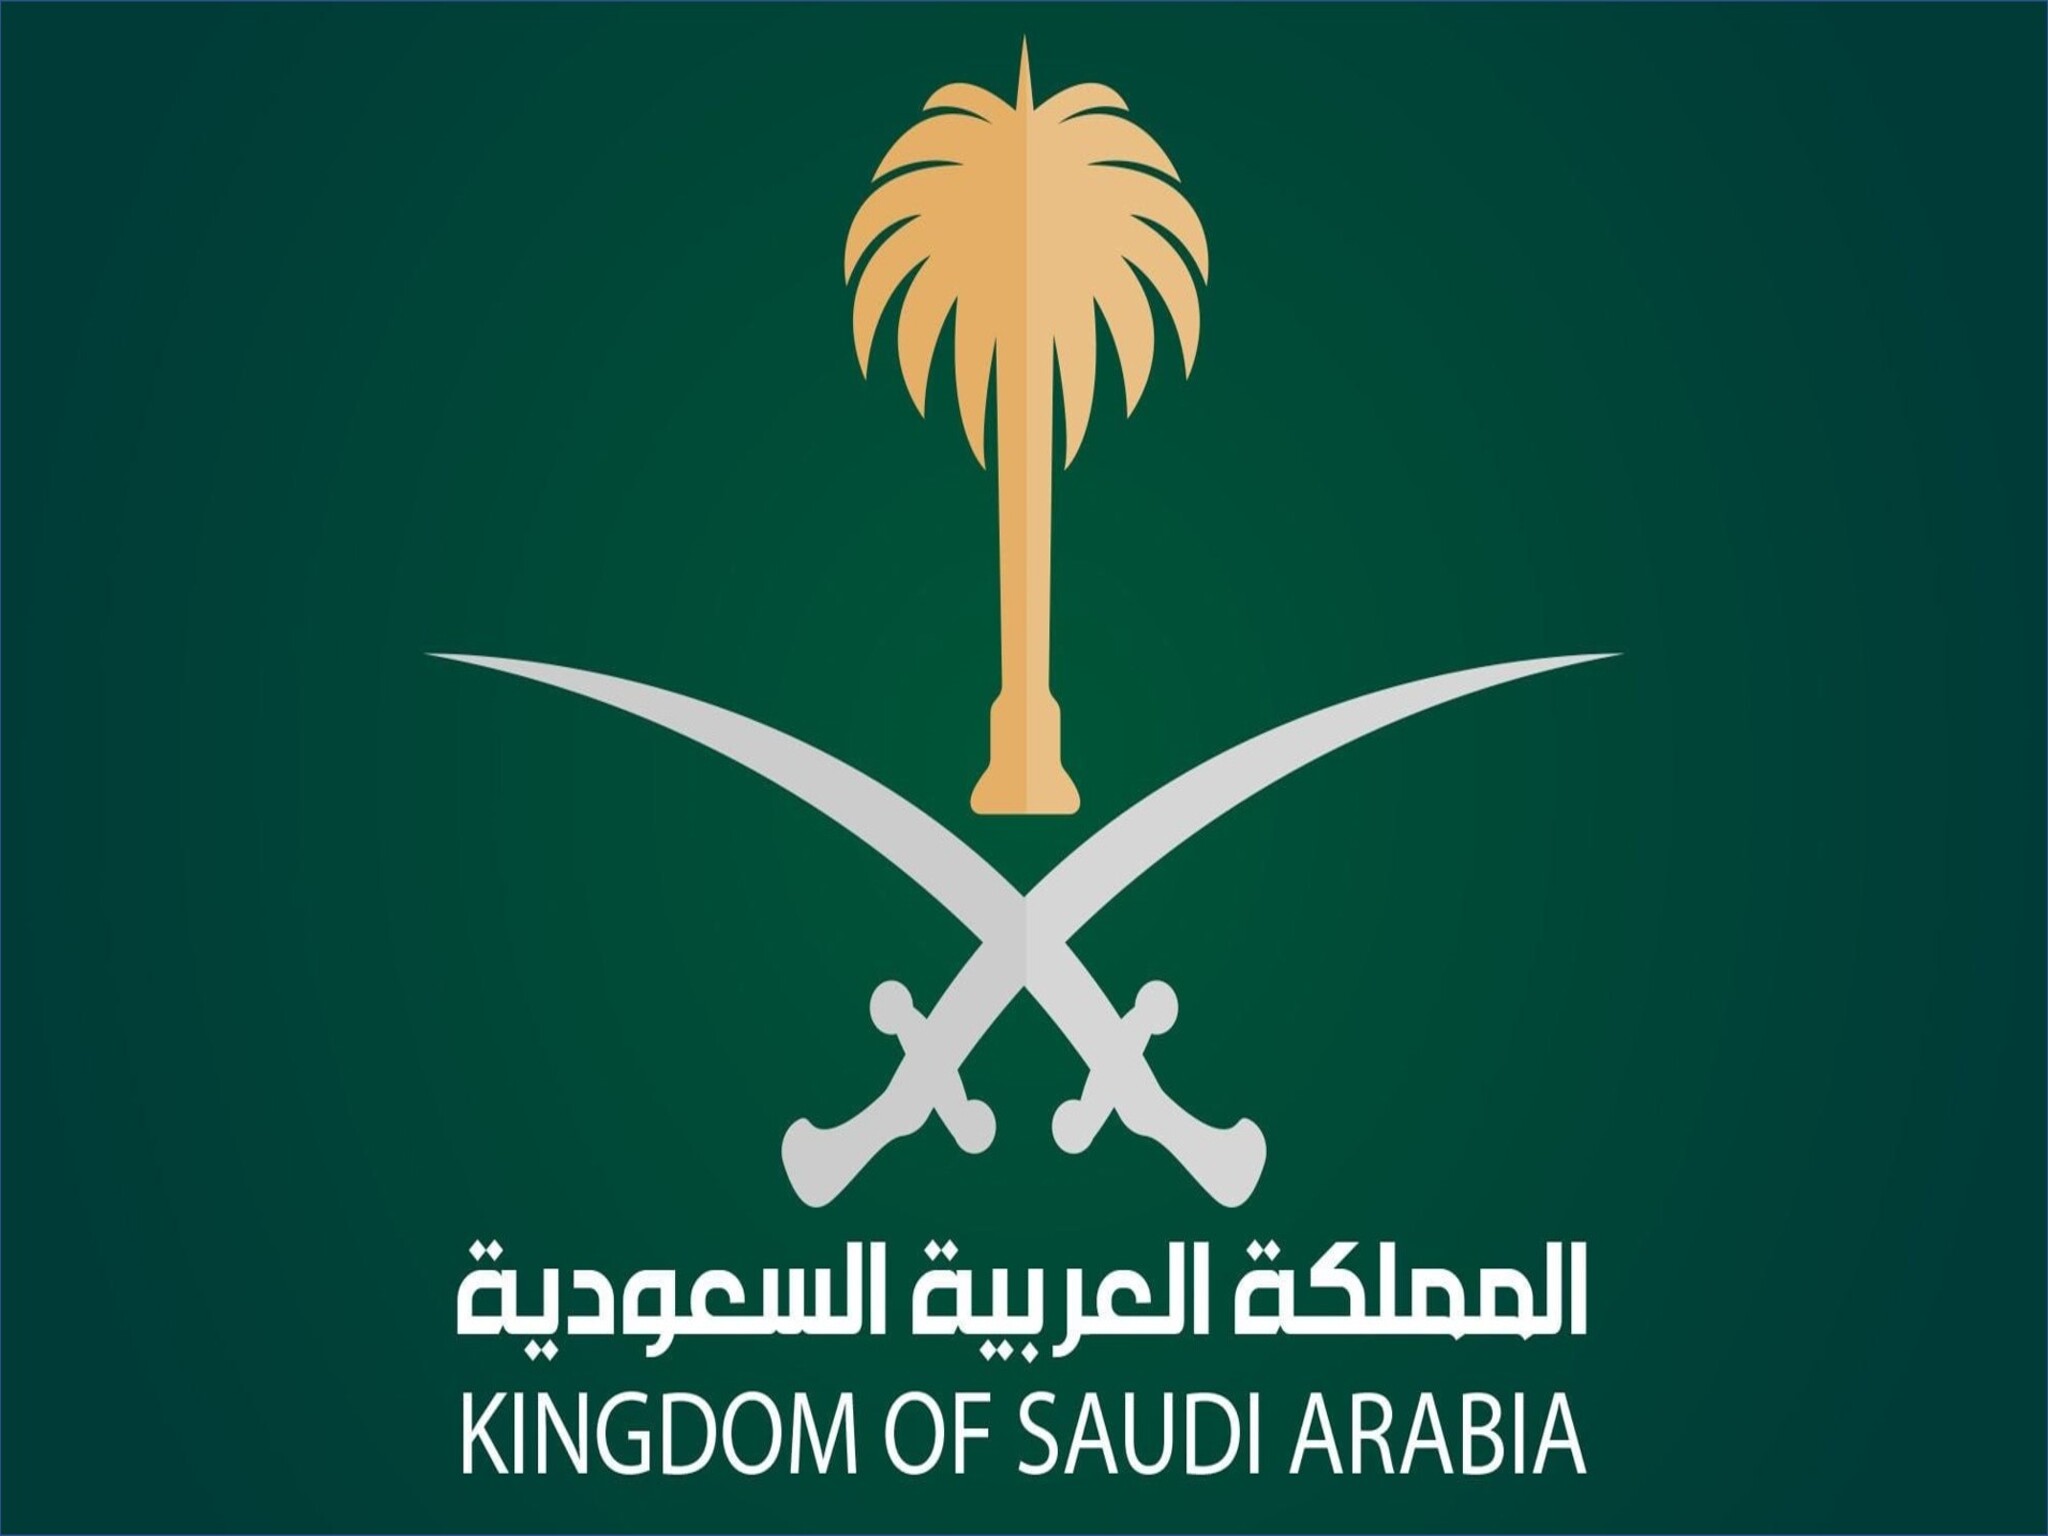 Urgent Saudi Arabia: An important alert from the Saudi Ministry of Foreign Affairs for Saudis coming from abro